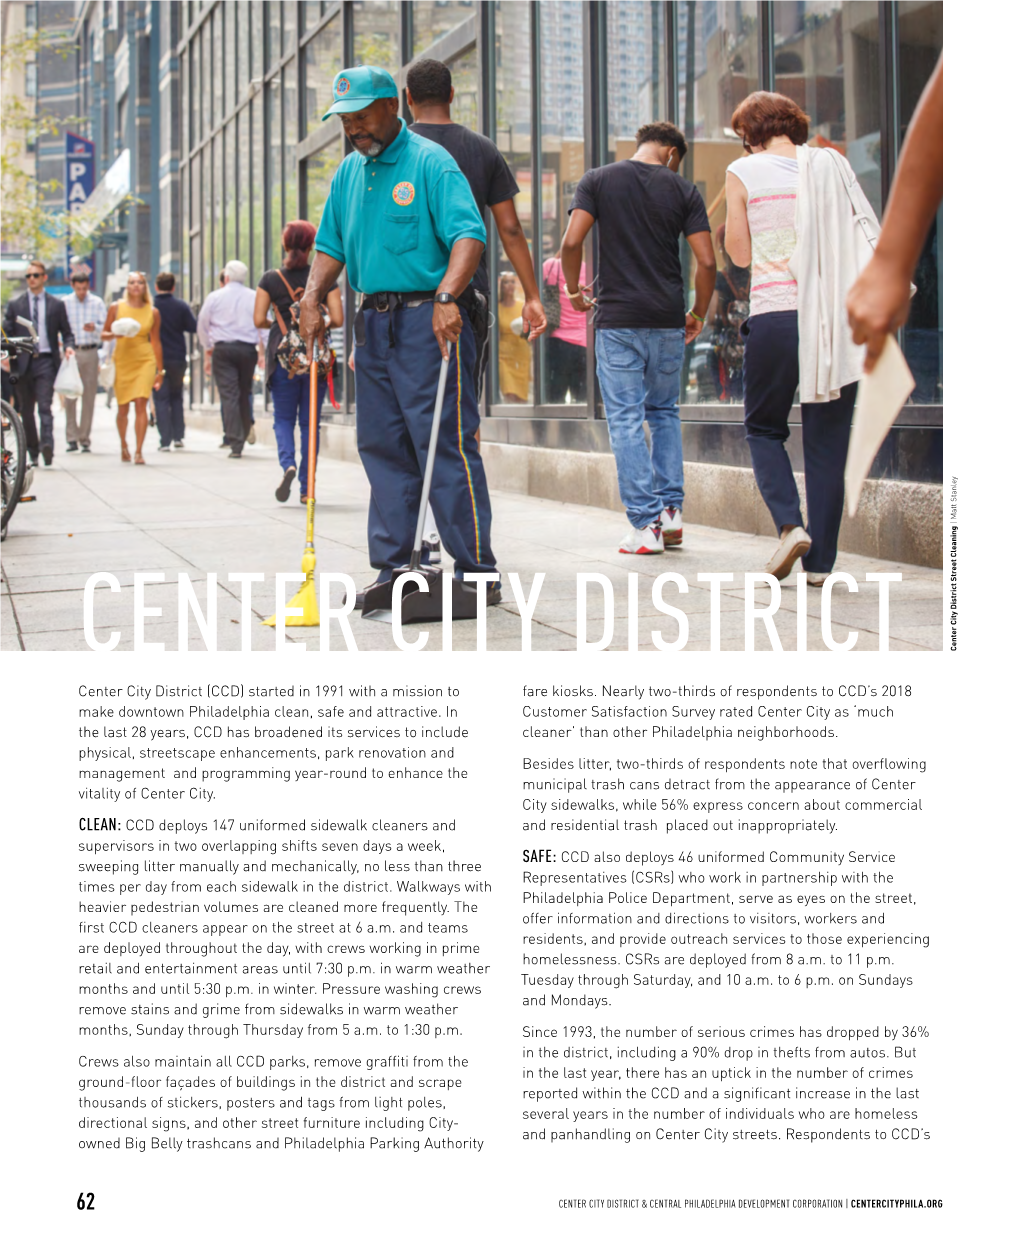 Center City District (CCD) Started in 1991 with a Mission to Make